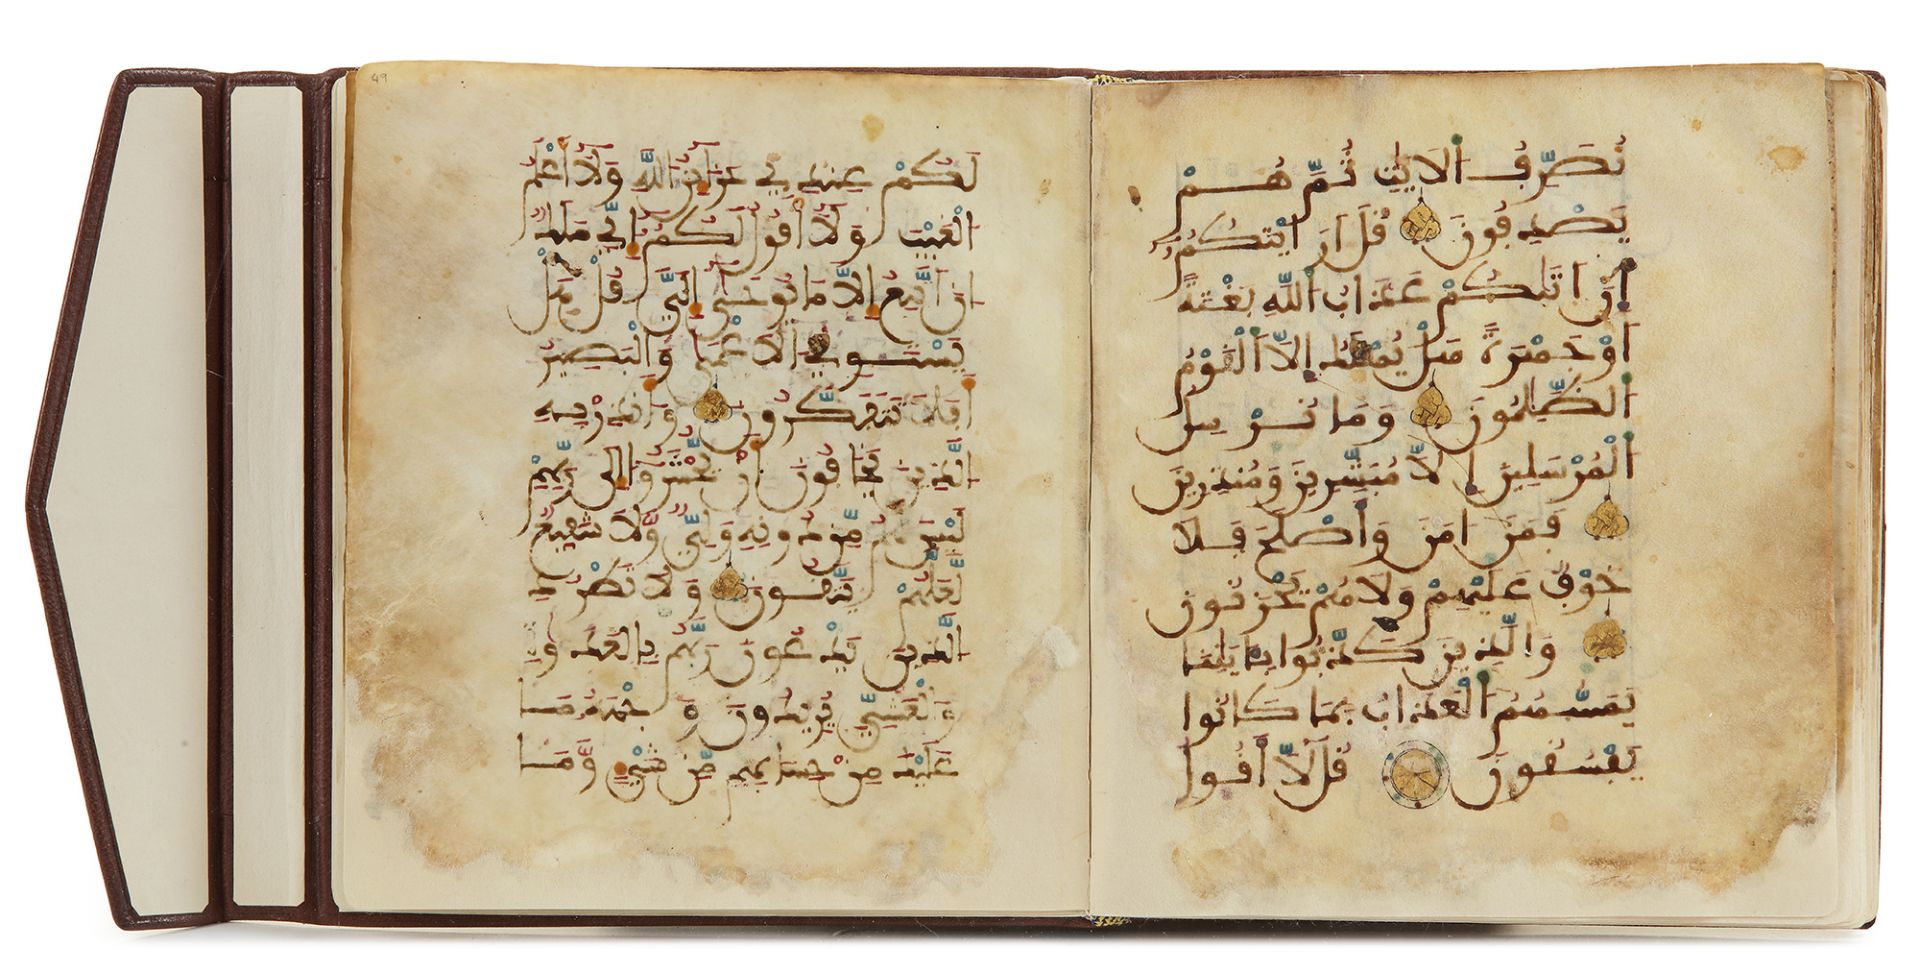 A MAGHRIBI SCRIPT QURAN SECTION, NORTH-AFRICA OR ANDALUSIA, CIRCA 13TH CENTURY - Bild 3 aus 4